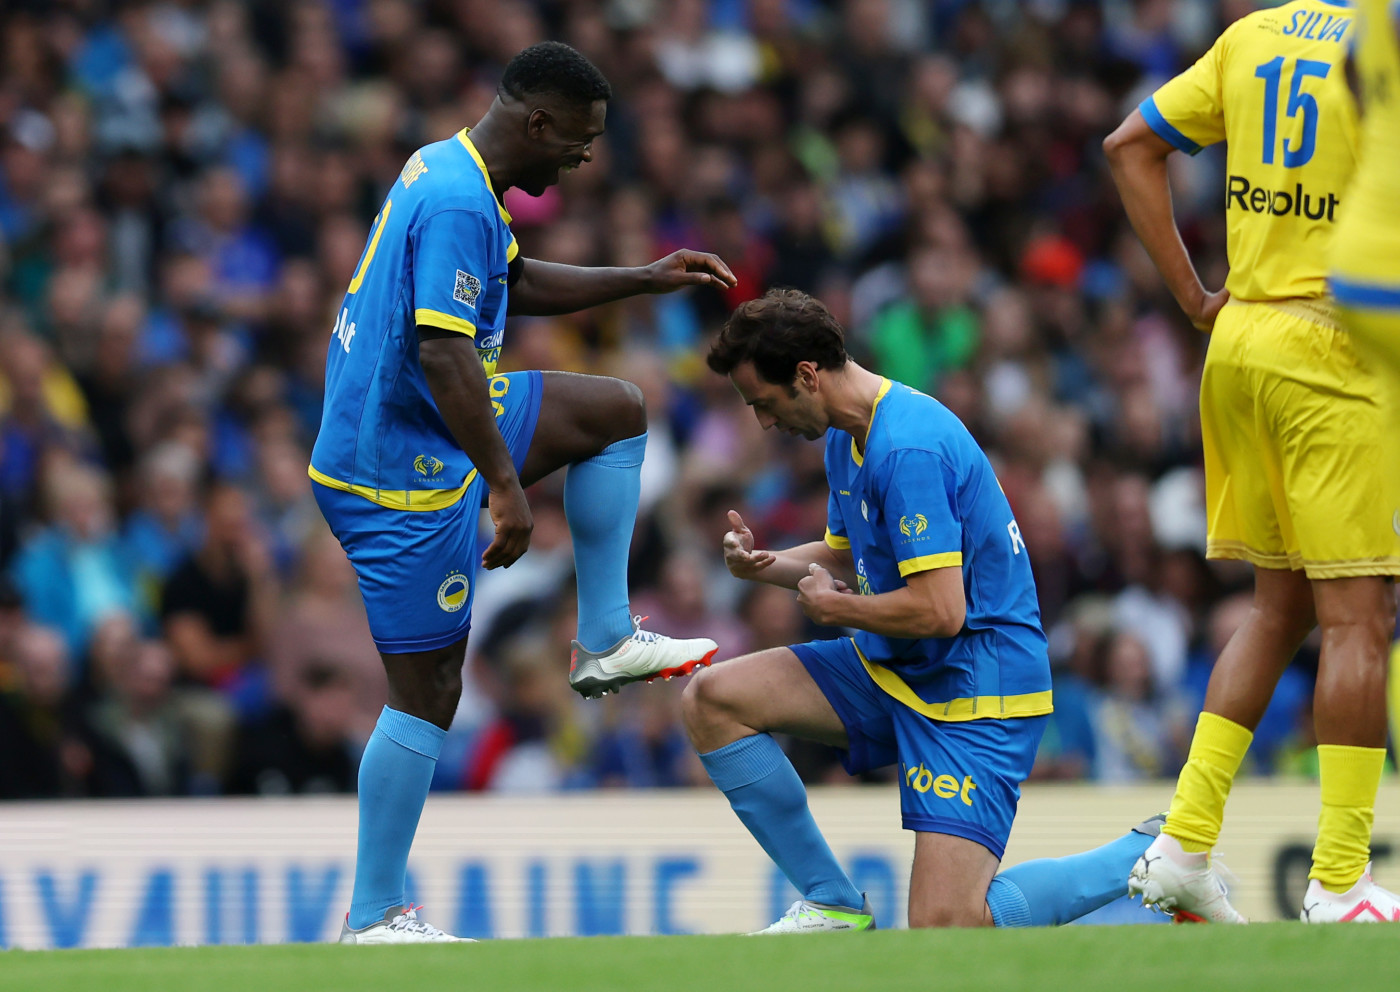 Actor Ralf Little shows his appreciation for Seedorf's stunning strike